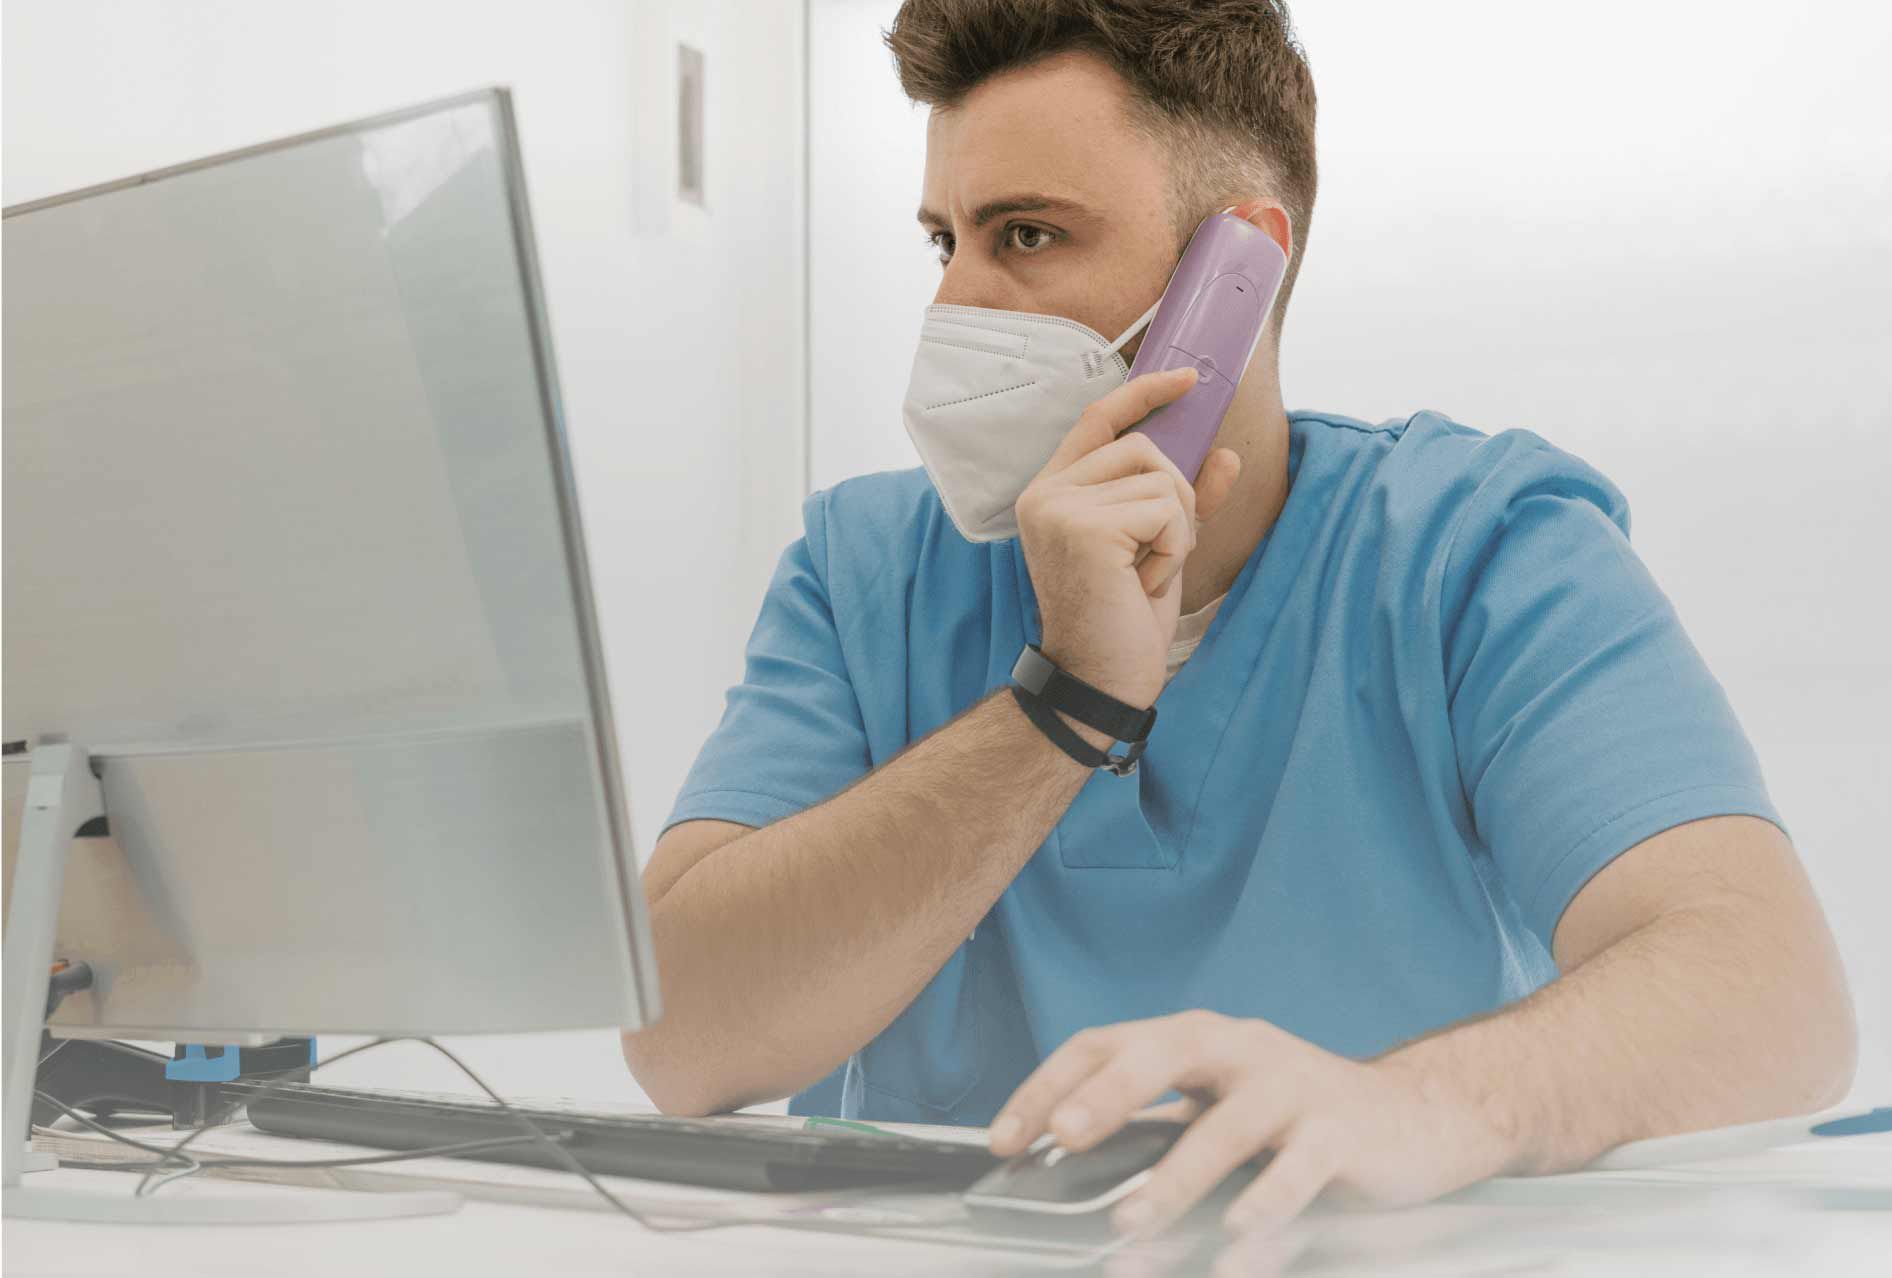 Man in blue scrubs talking on the phone while sitting at a desktop computer.